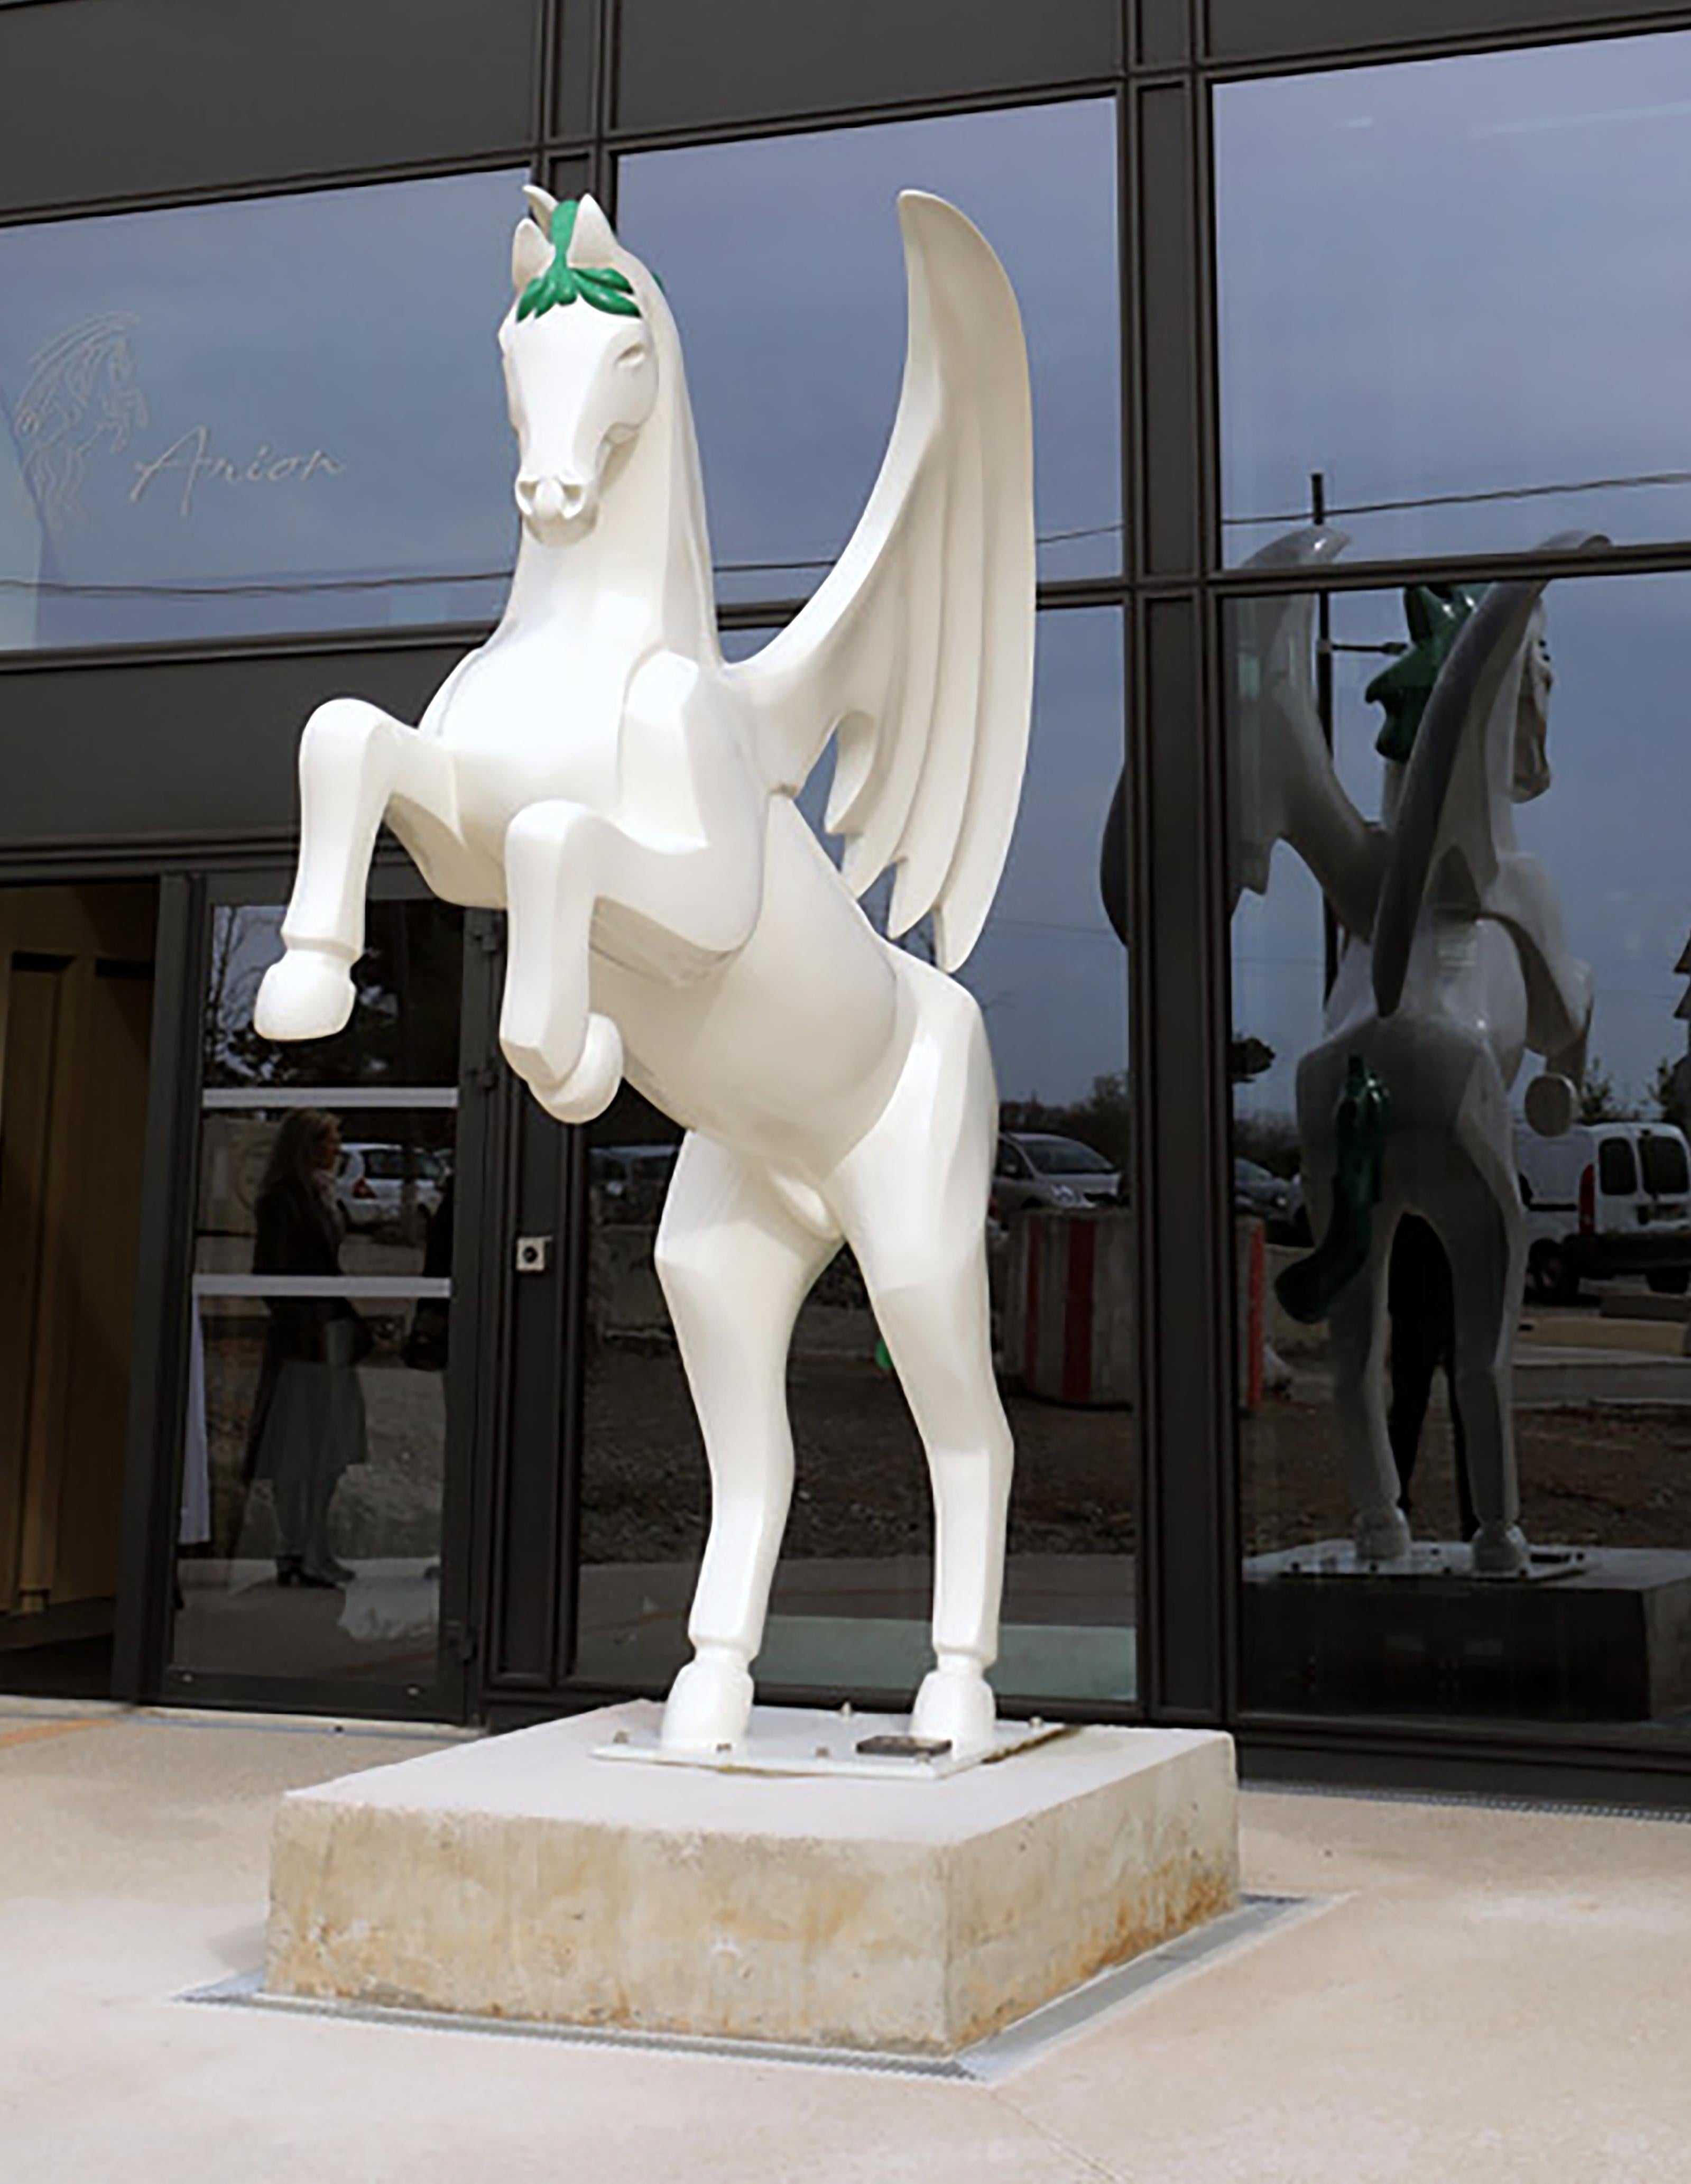 Mariko’s Arion is an unique monumental contemporary horse sculpture made of resin and reinforced with an inside metallic structure, finished with a bi-component urethane paint, extremely resistant to UV exposure and outside weather.
Mariko grew up